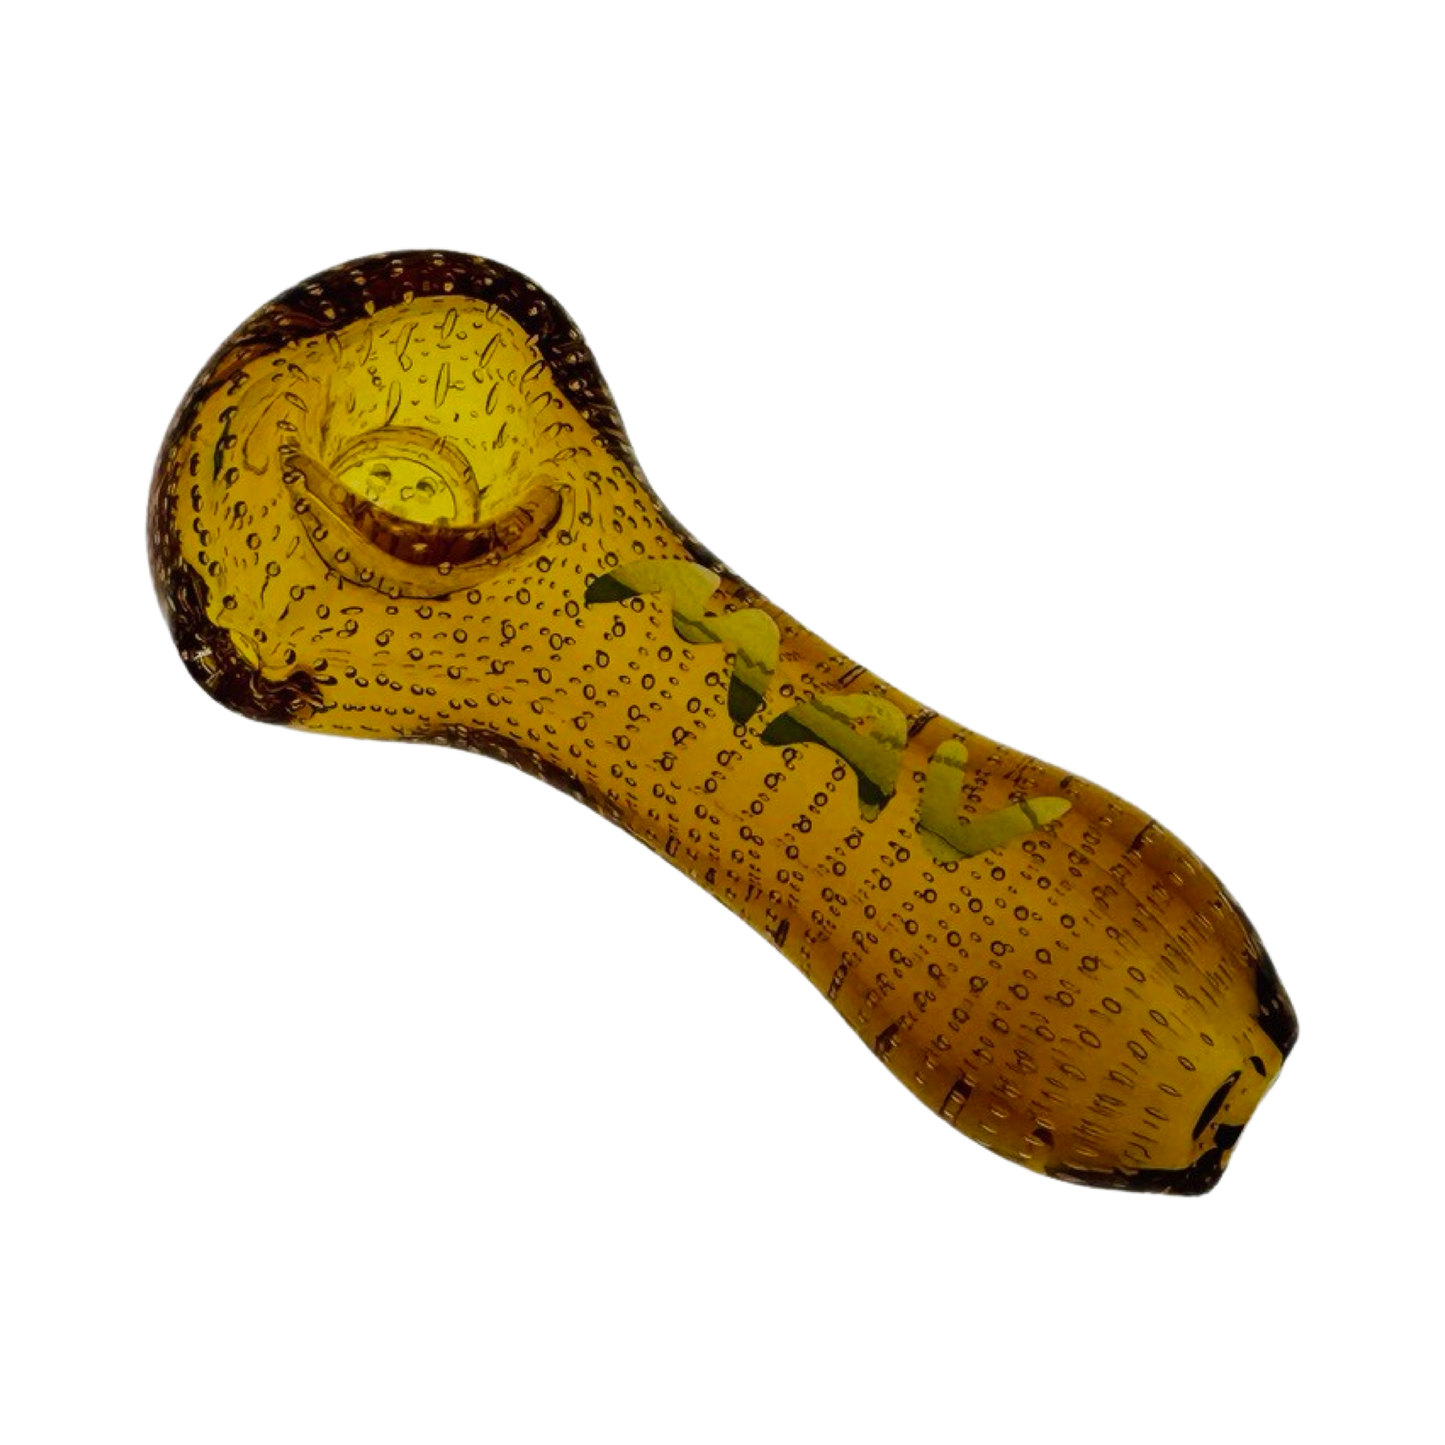 carbonated 7 hole Professional Hand Pipe